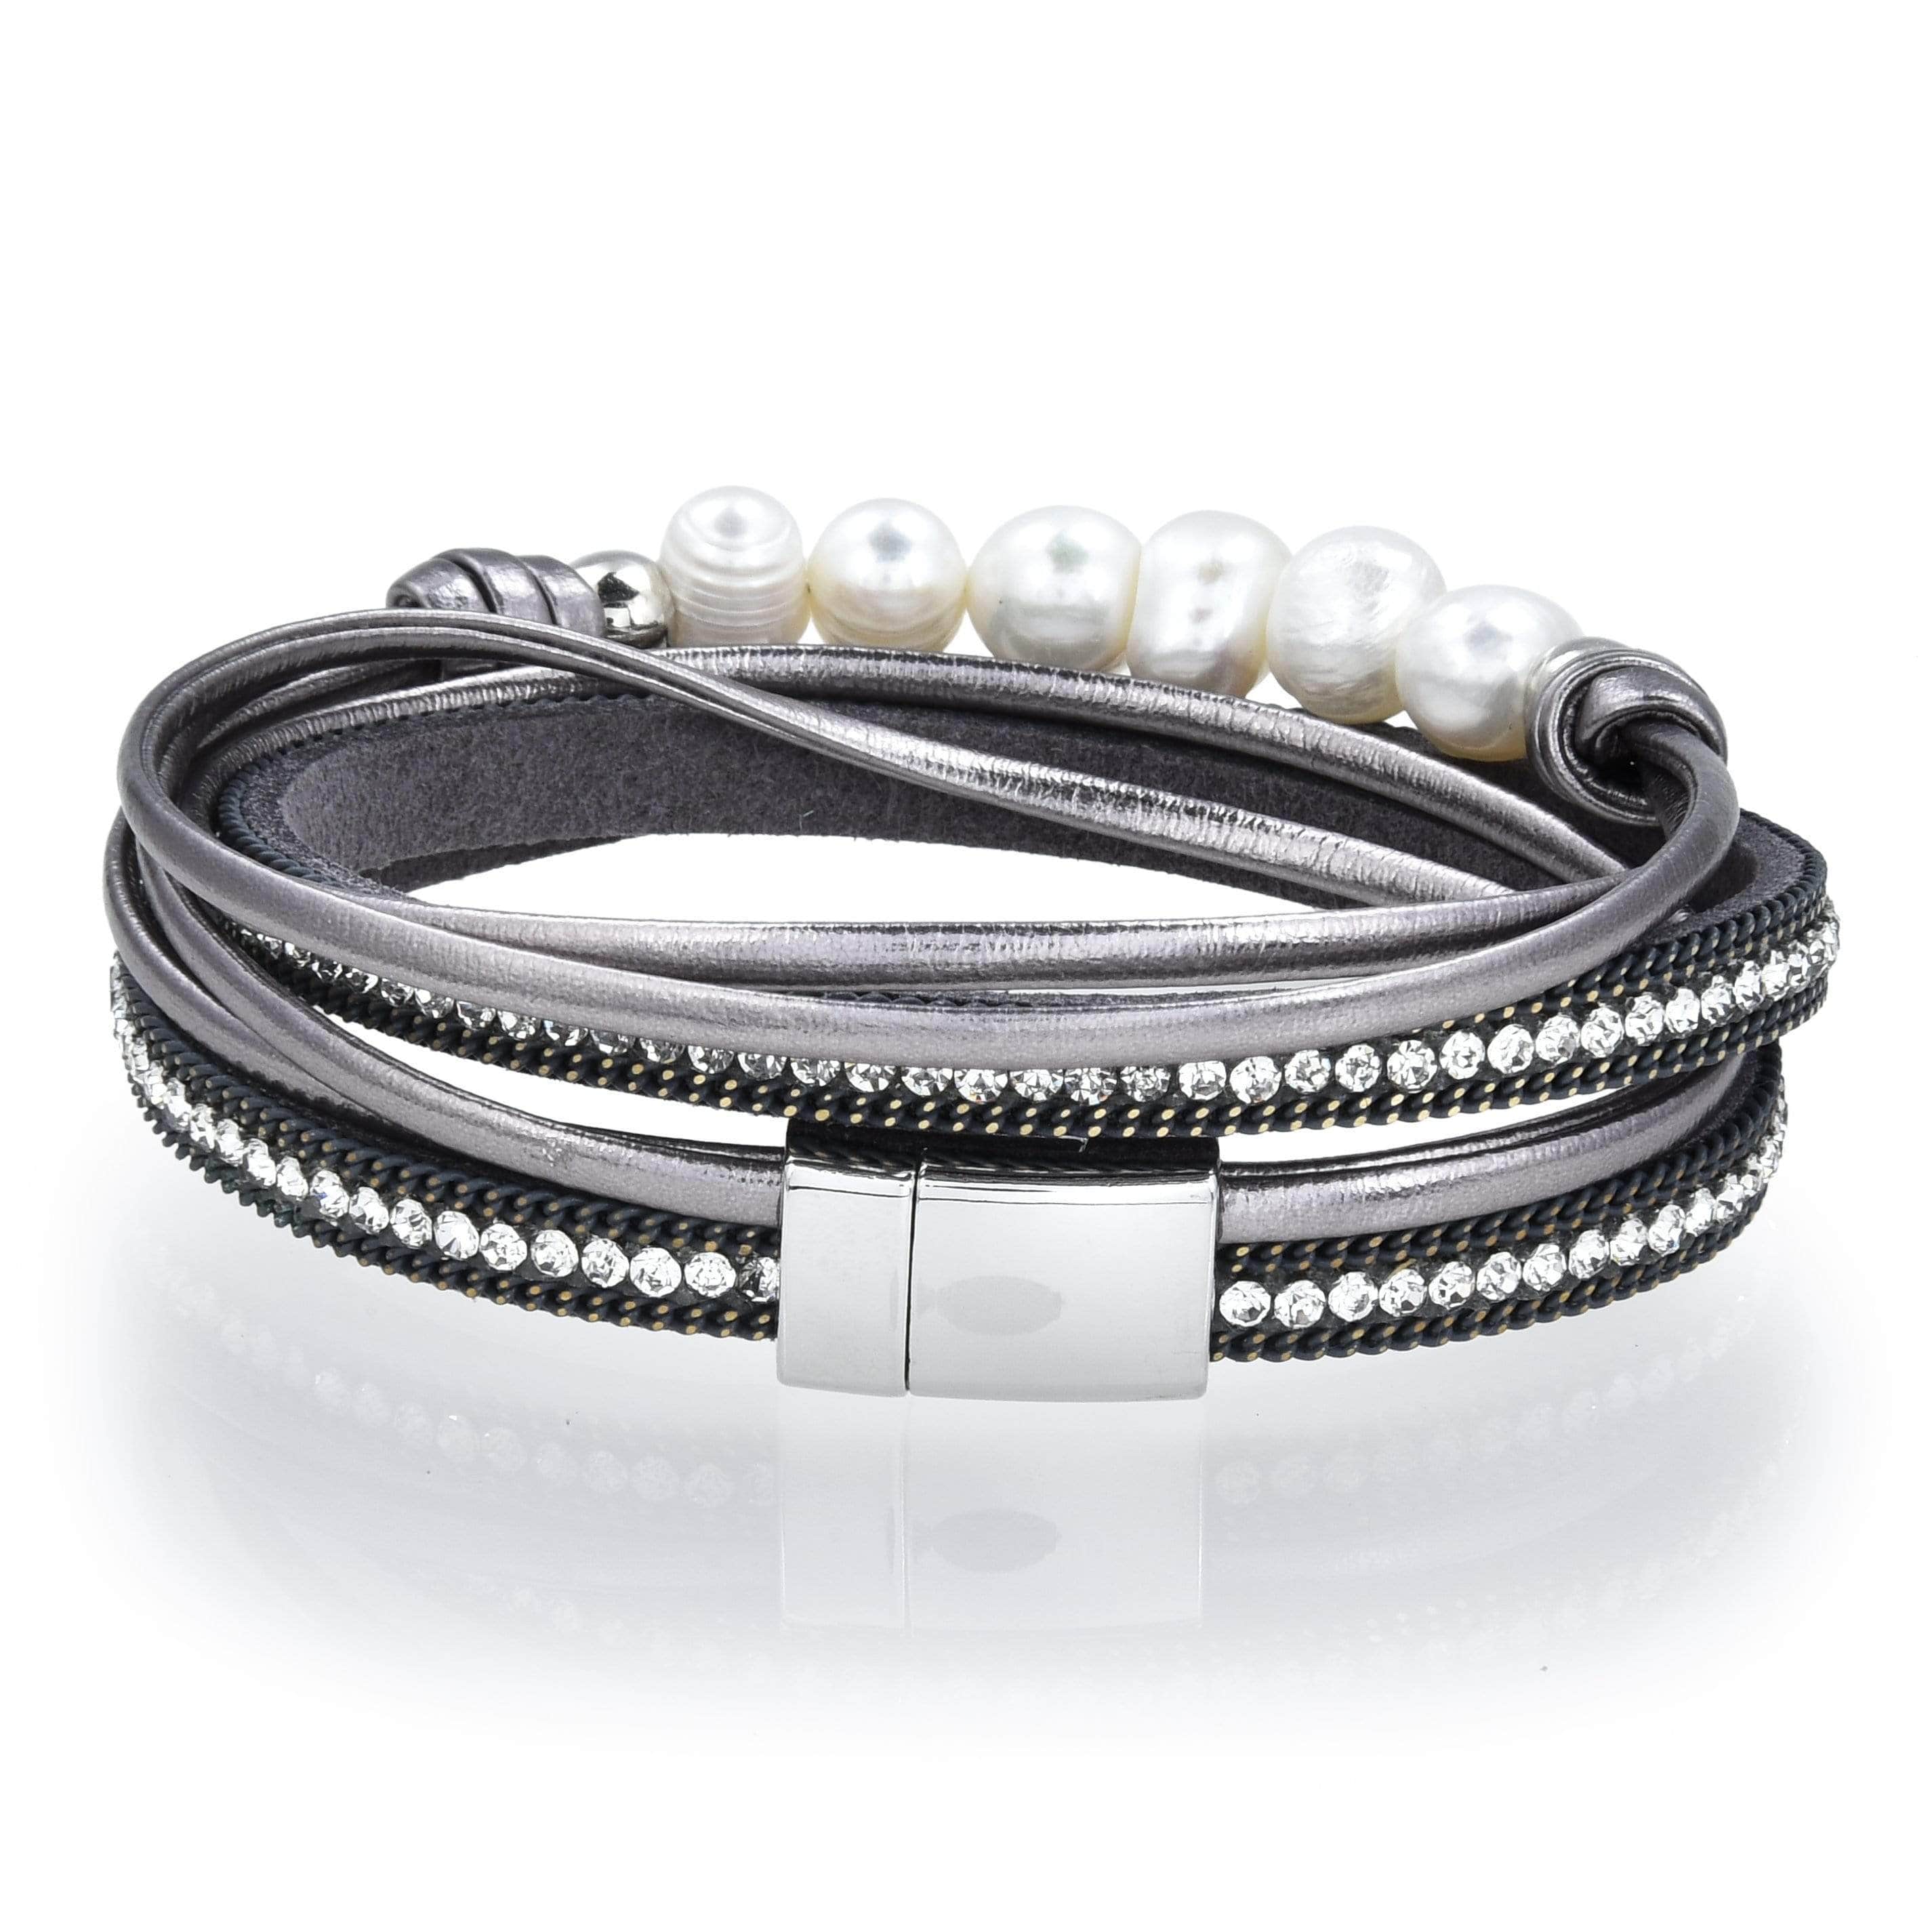 Kalifano Multiwrap Bracelets Multiple Strand Pearl and Diamonds Gray Bracelet with Magnetic Clasp BMW-20-GY